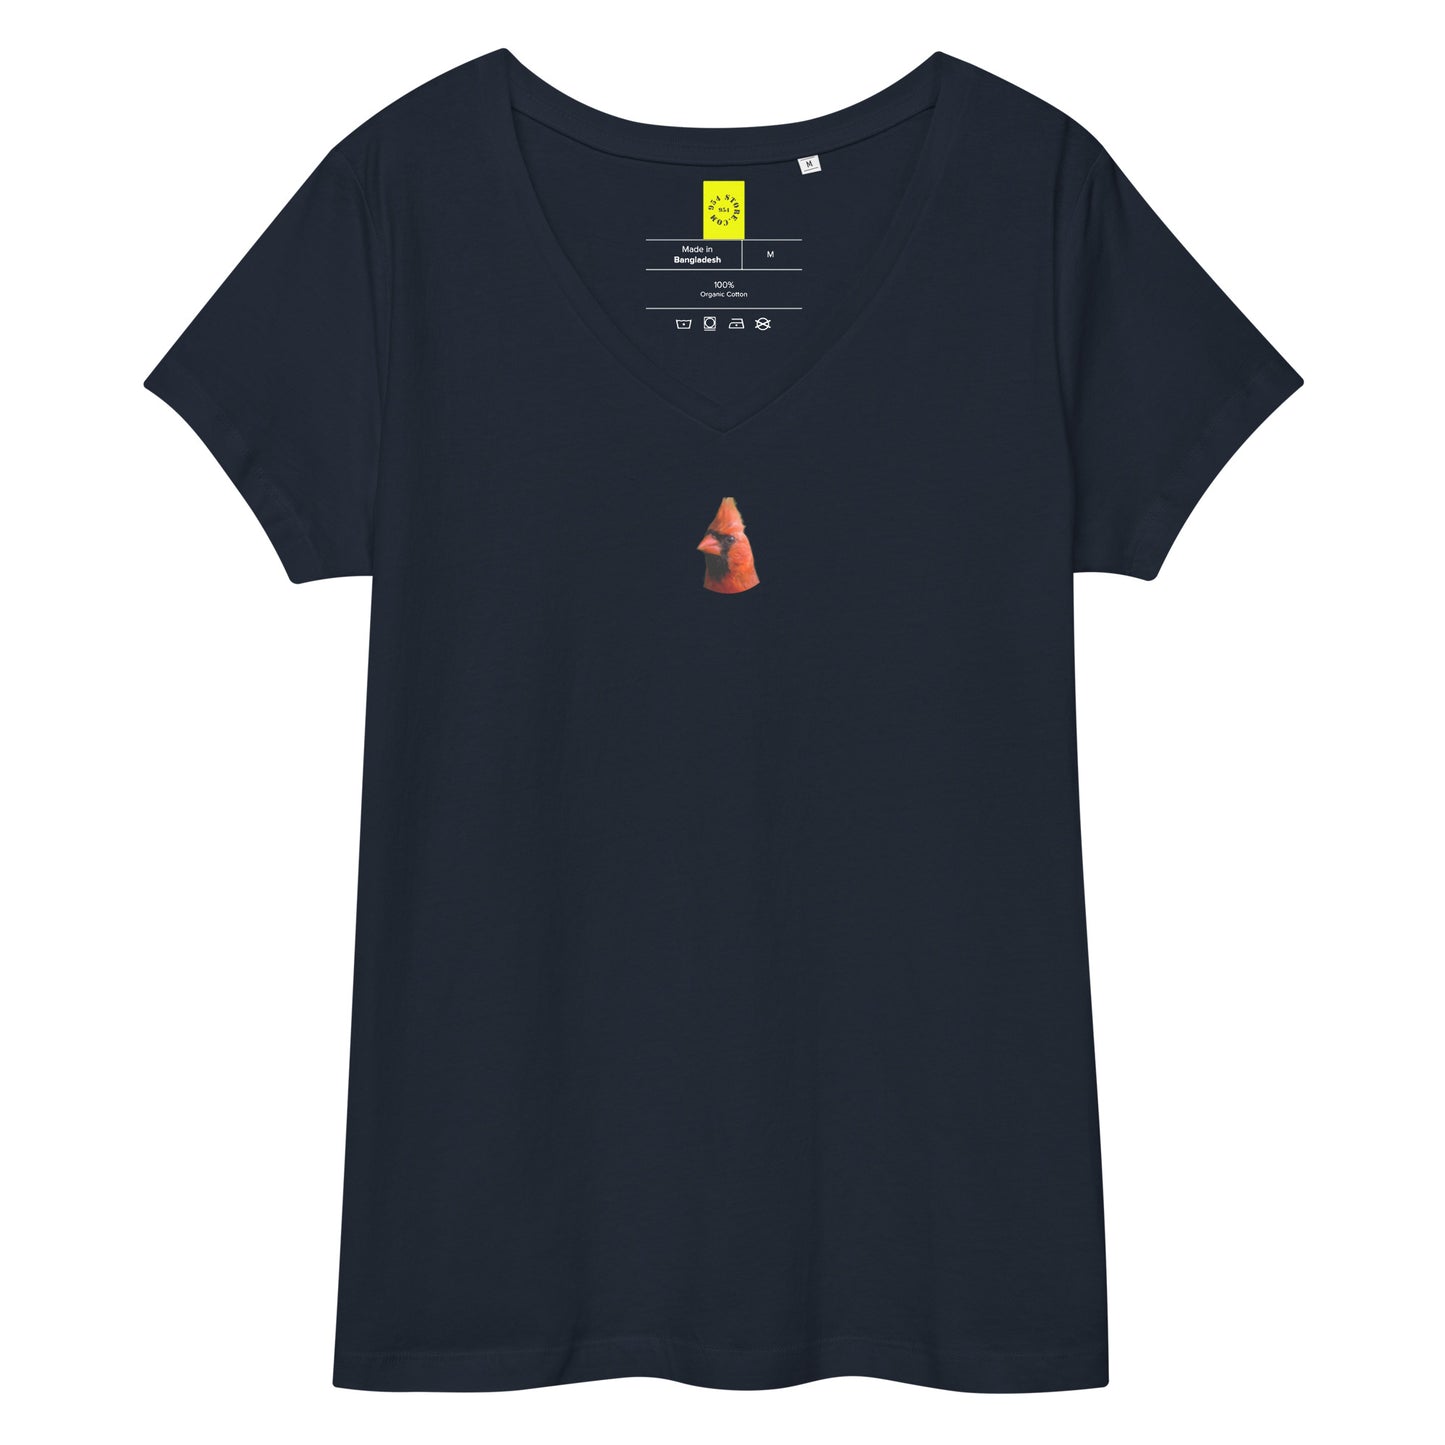 Norther Cardinal Women’s fitted v-neck t-shirt